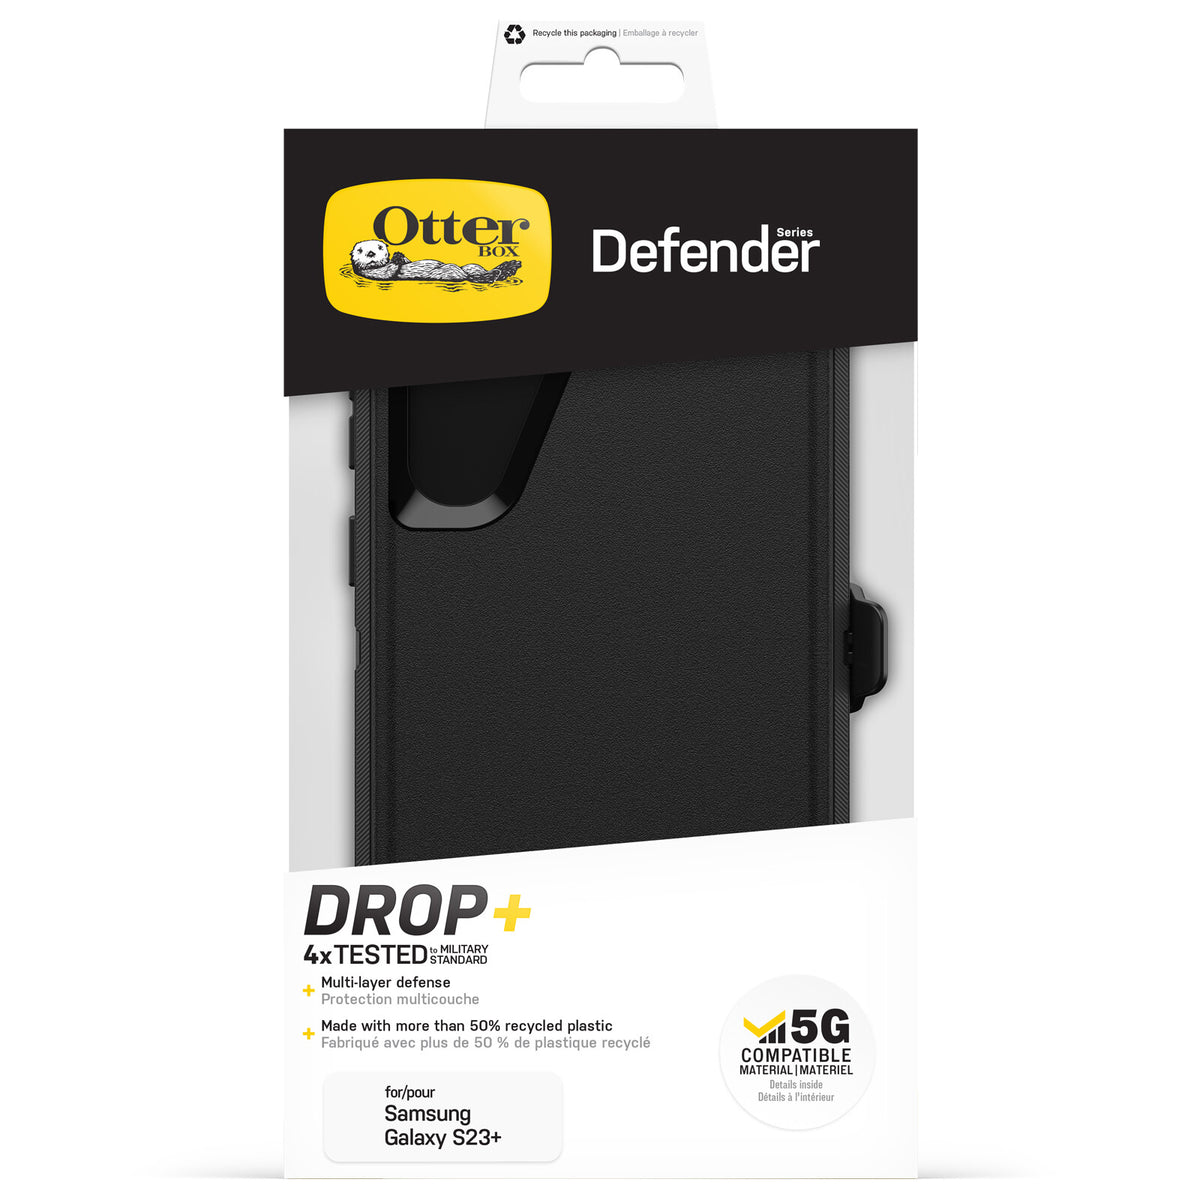 OtterBox Defender Case for Samsung Galaxy S23+ in Black